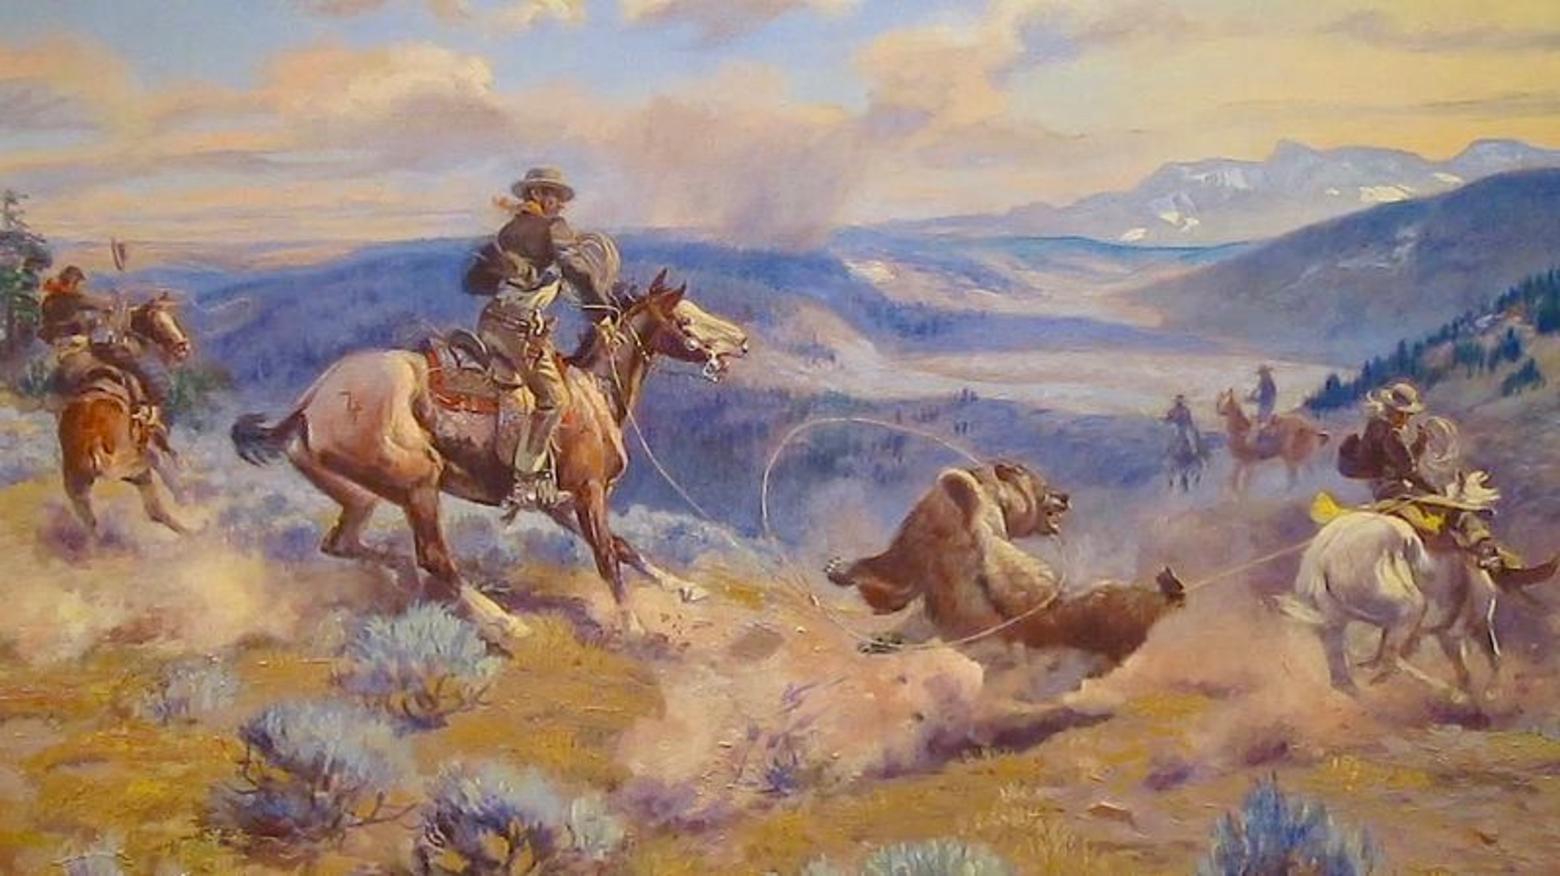 "Loops and Swift Horses Are Surer Than Lead," a painting by Charles M. Russell (1916). One of Russell's most famous paintings portraying backward Old West attitudes toward grizzlies. Image courtesy Wikipedia. To see the real painting, visit the Amon Carter Museum in Ft. Worth, Texas (carter museum.org)